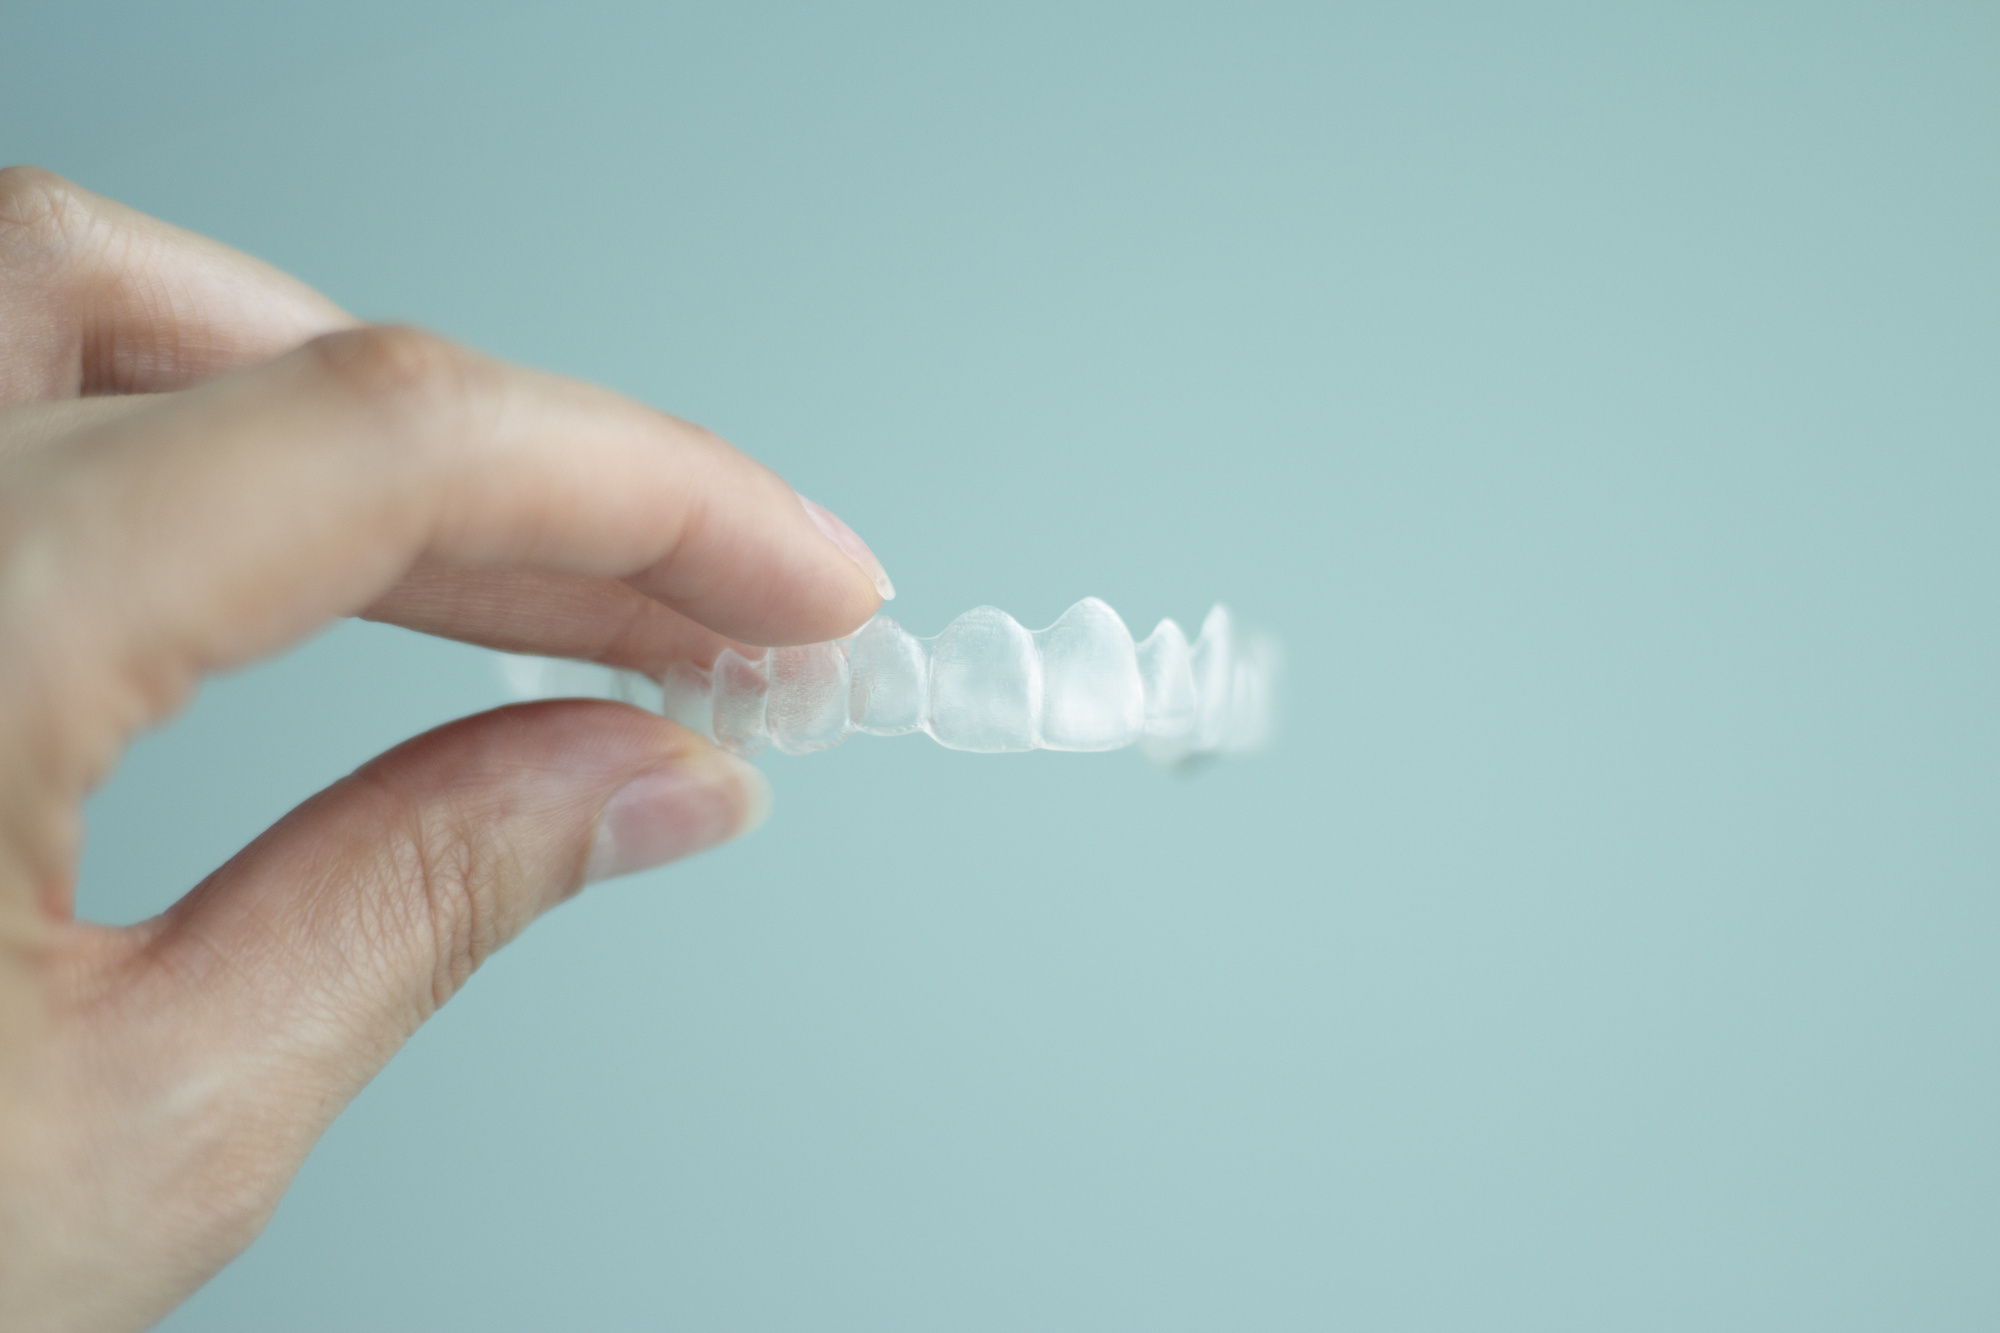 The Most Common Invisalign Cleaning Mistakes to Avoid